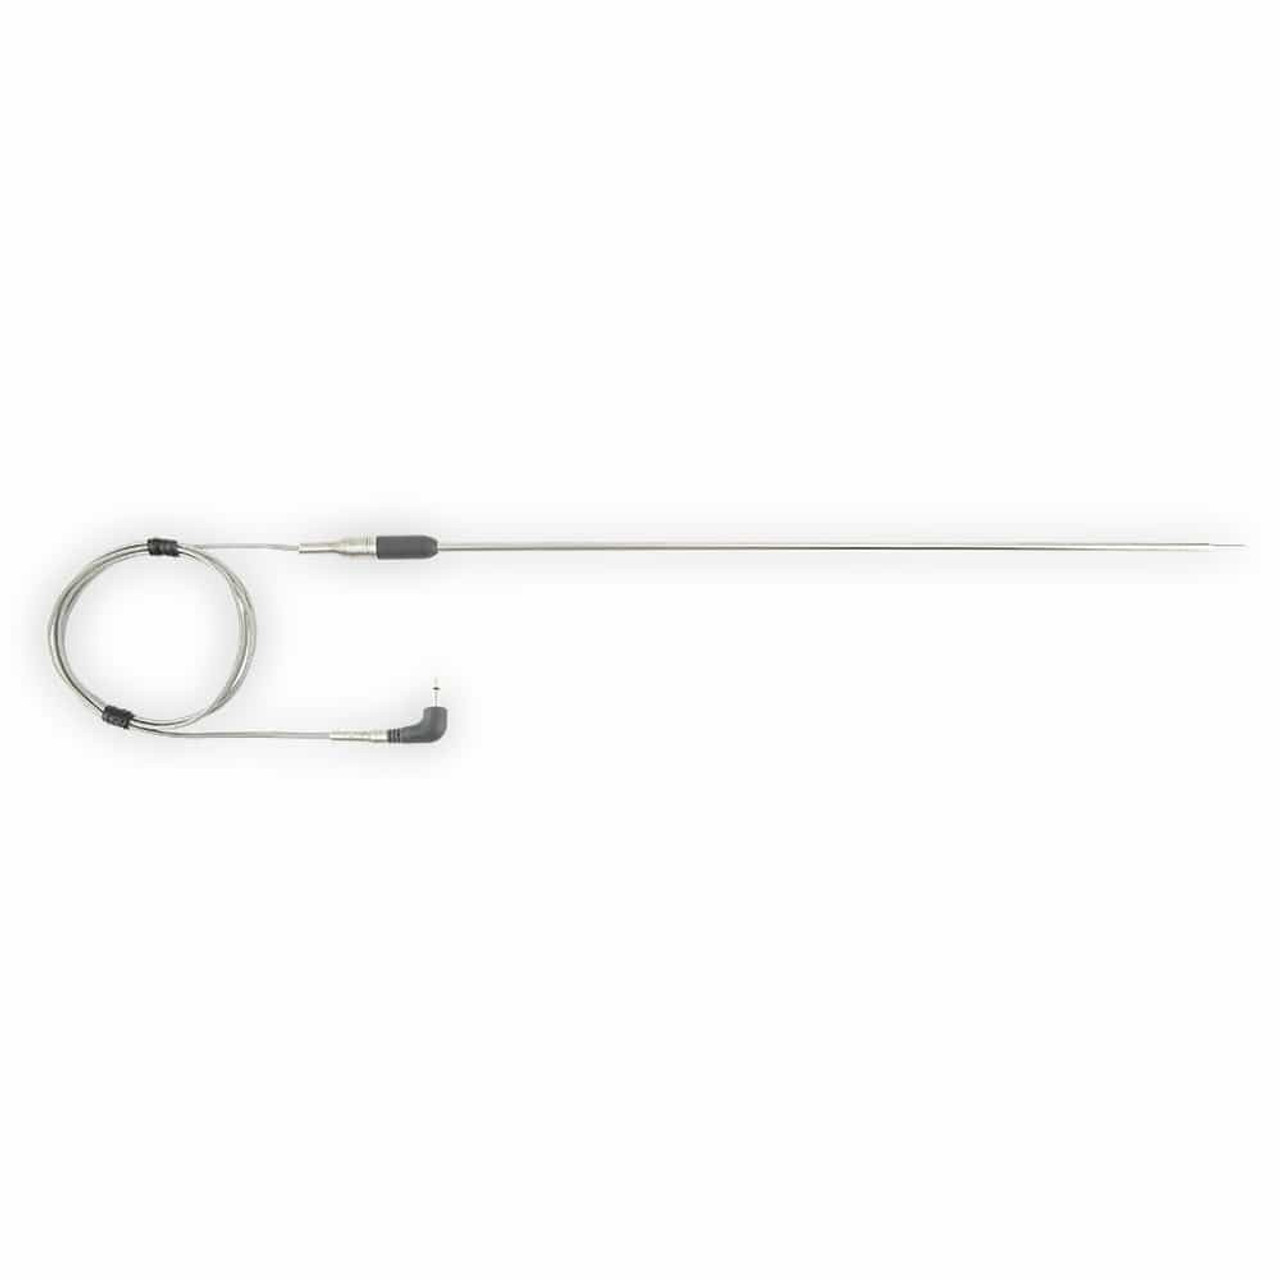 Buy Temperature Probes TP12 in stainless stell from TME at EMI